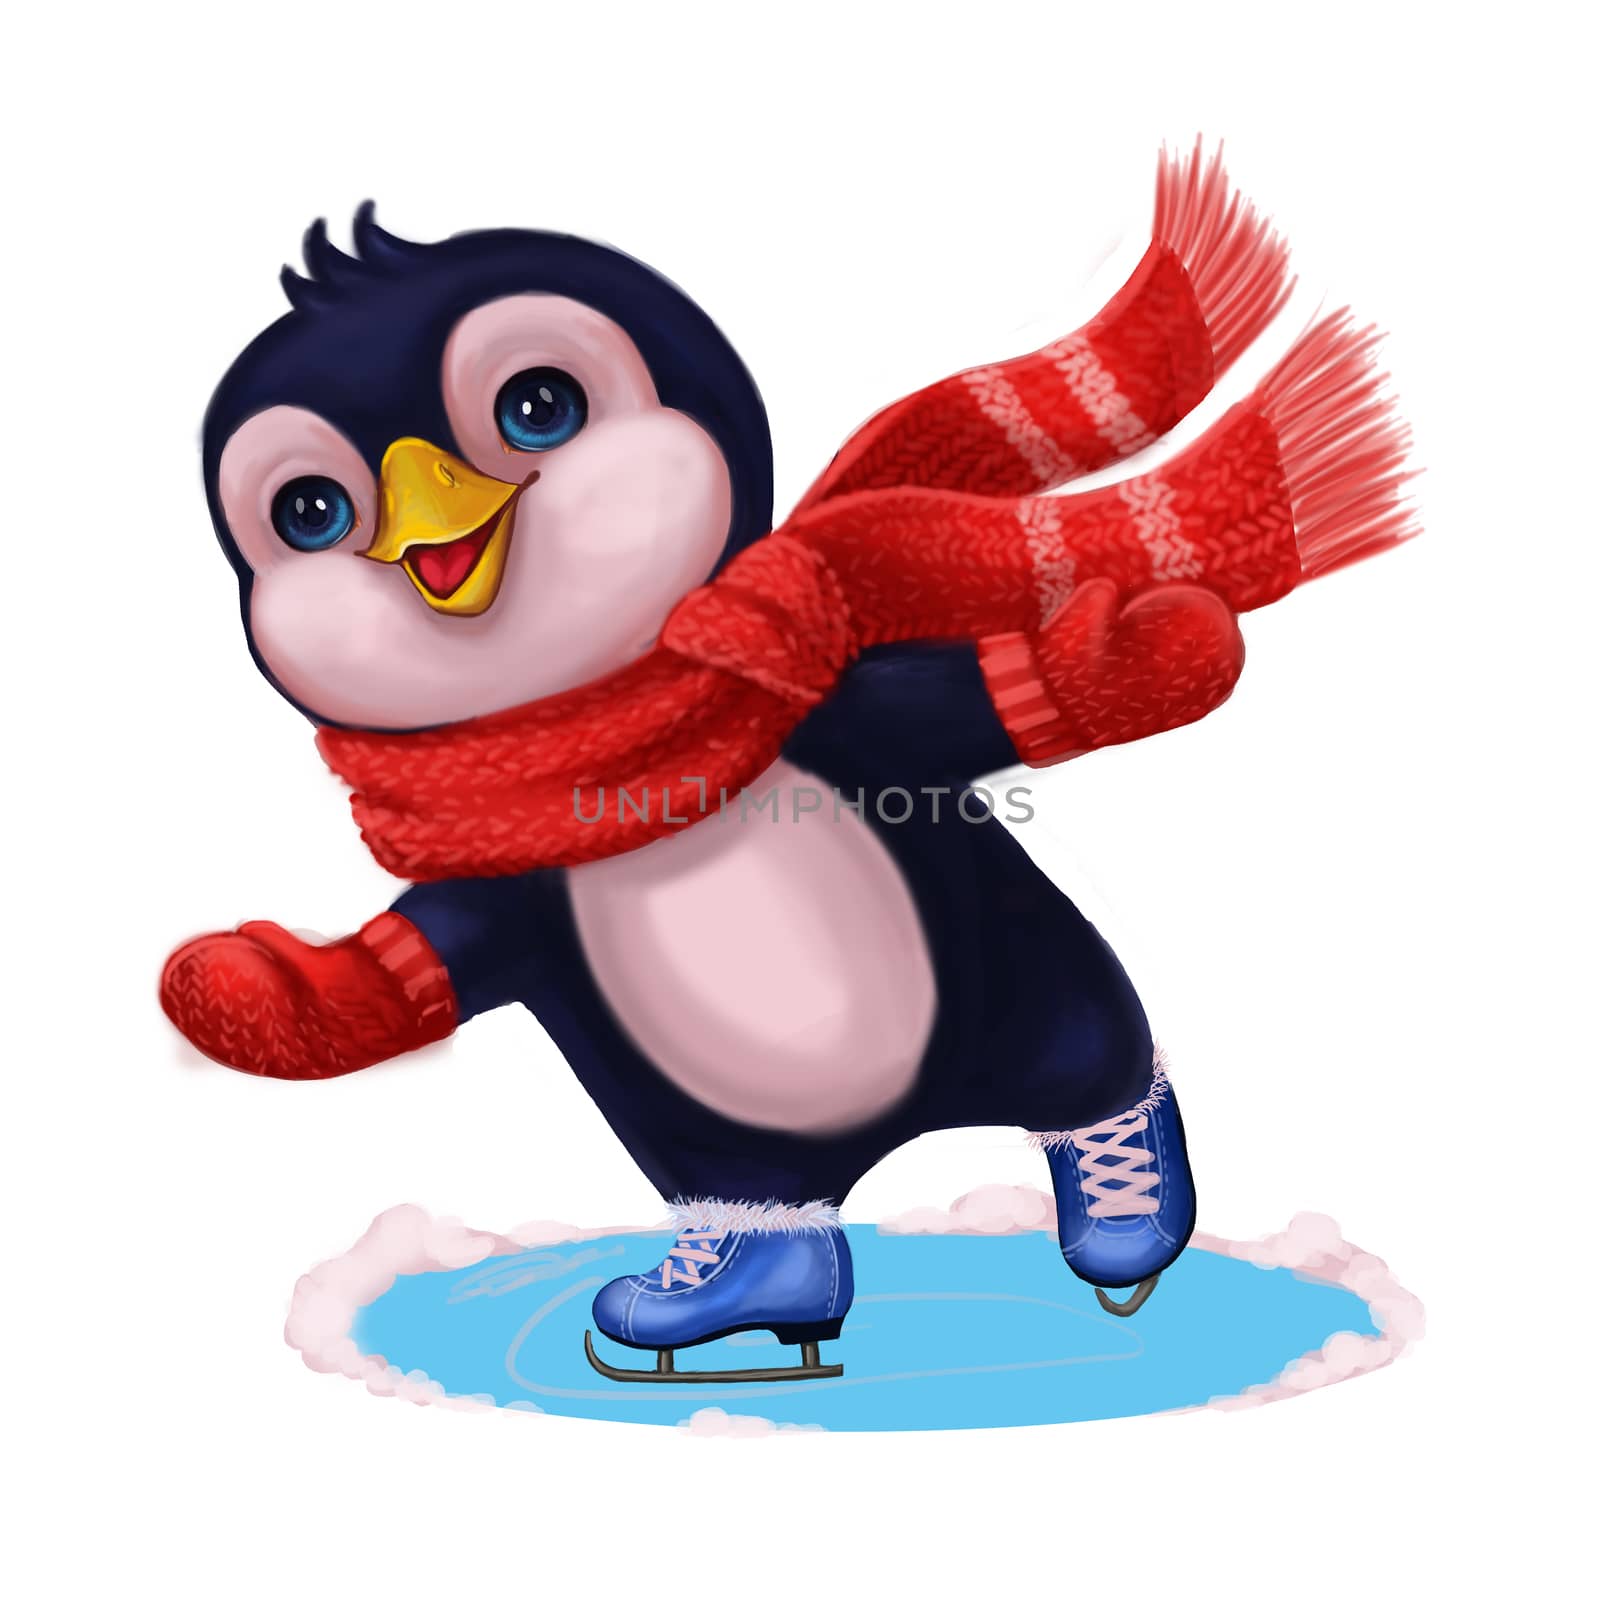 Season's Greetings with Penguin Ice Skating - Merry Christmas and Happy New Year by Loud-Mango